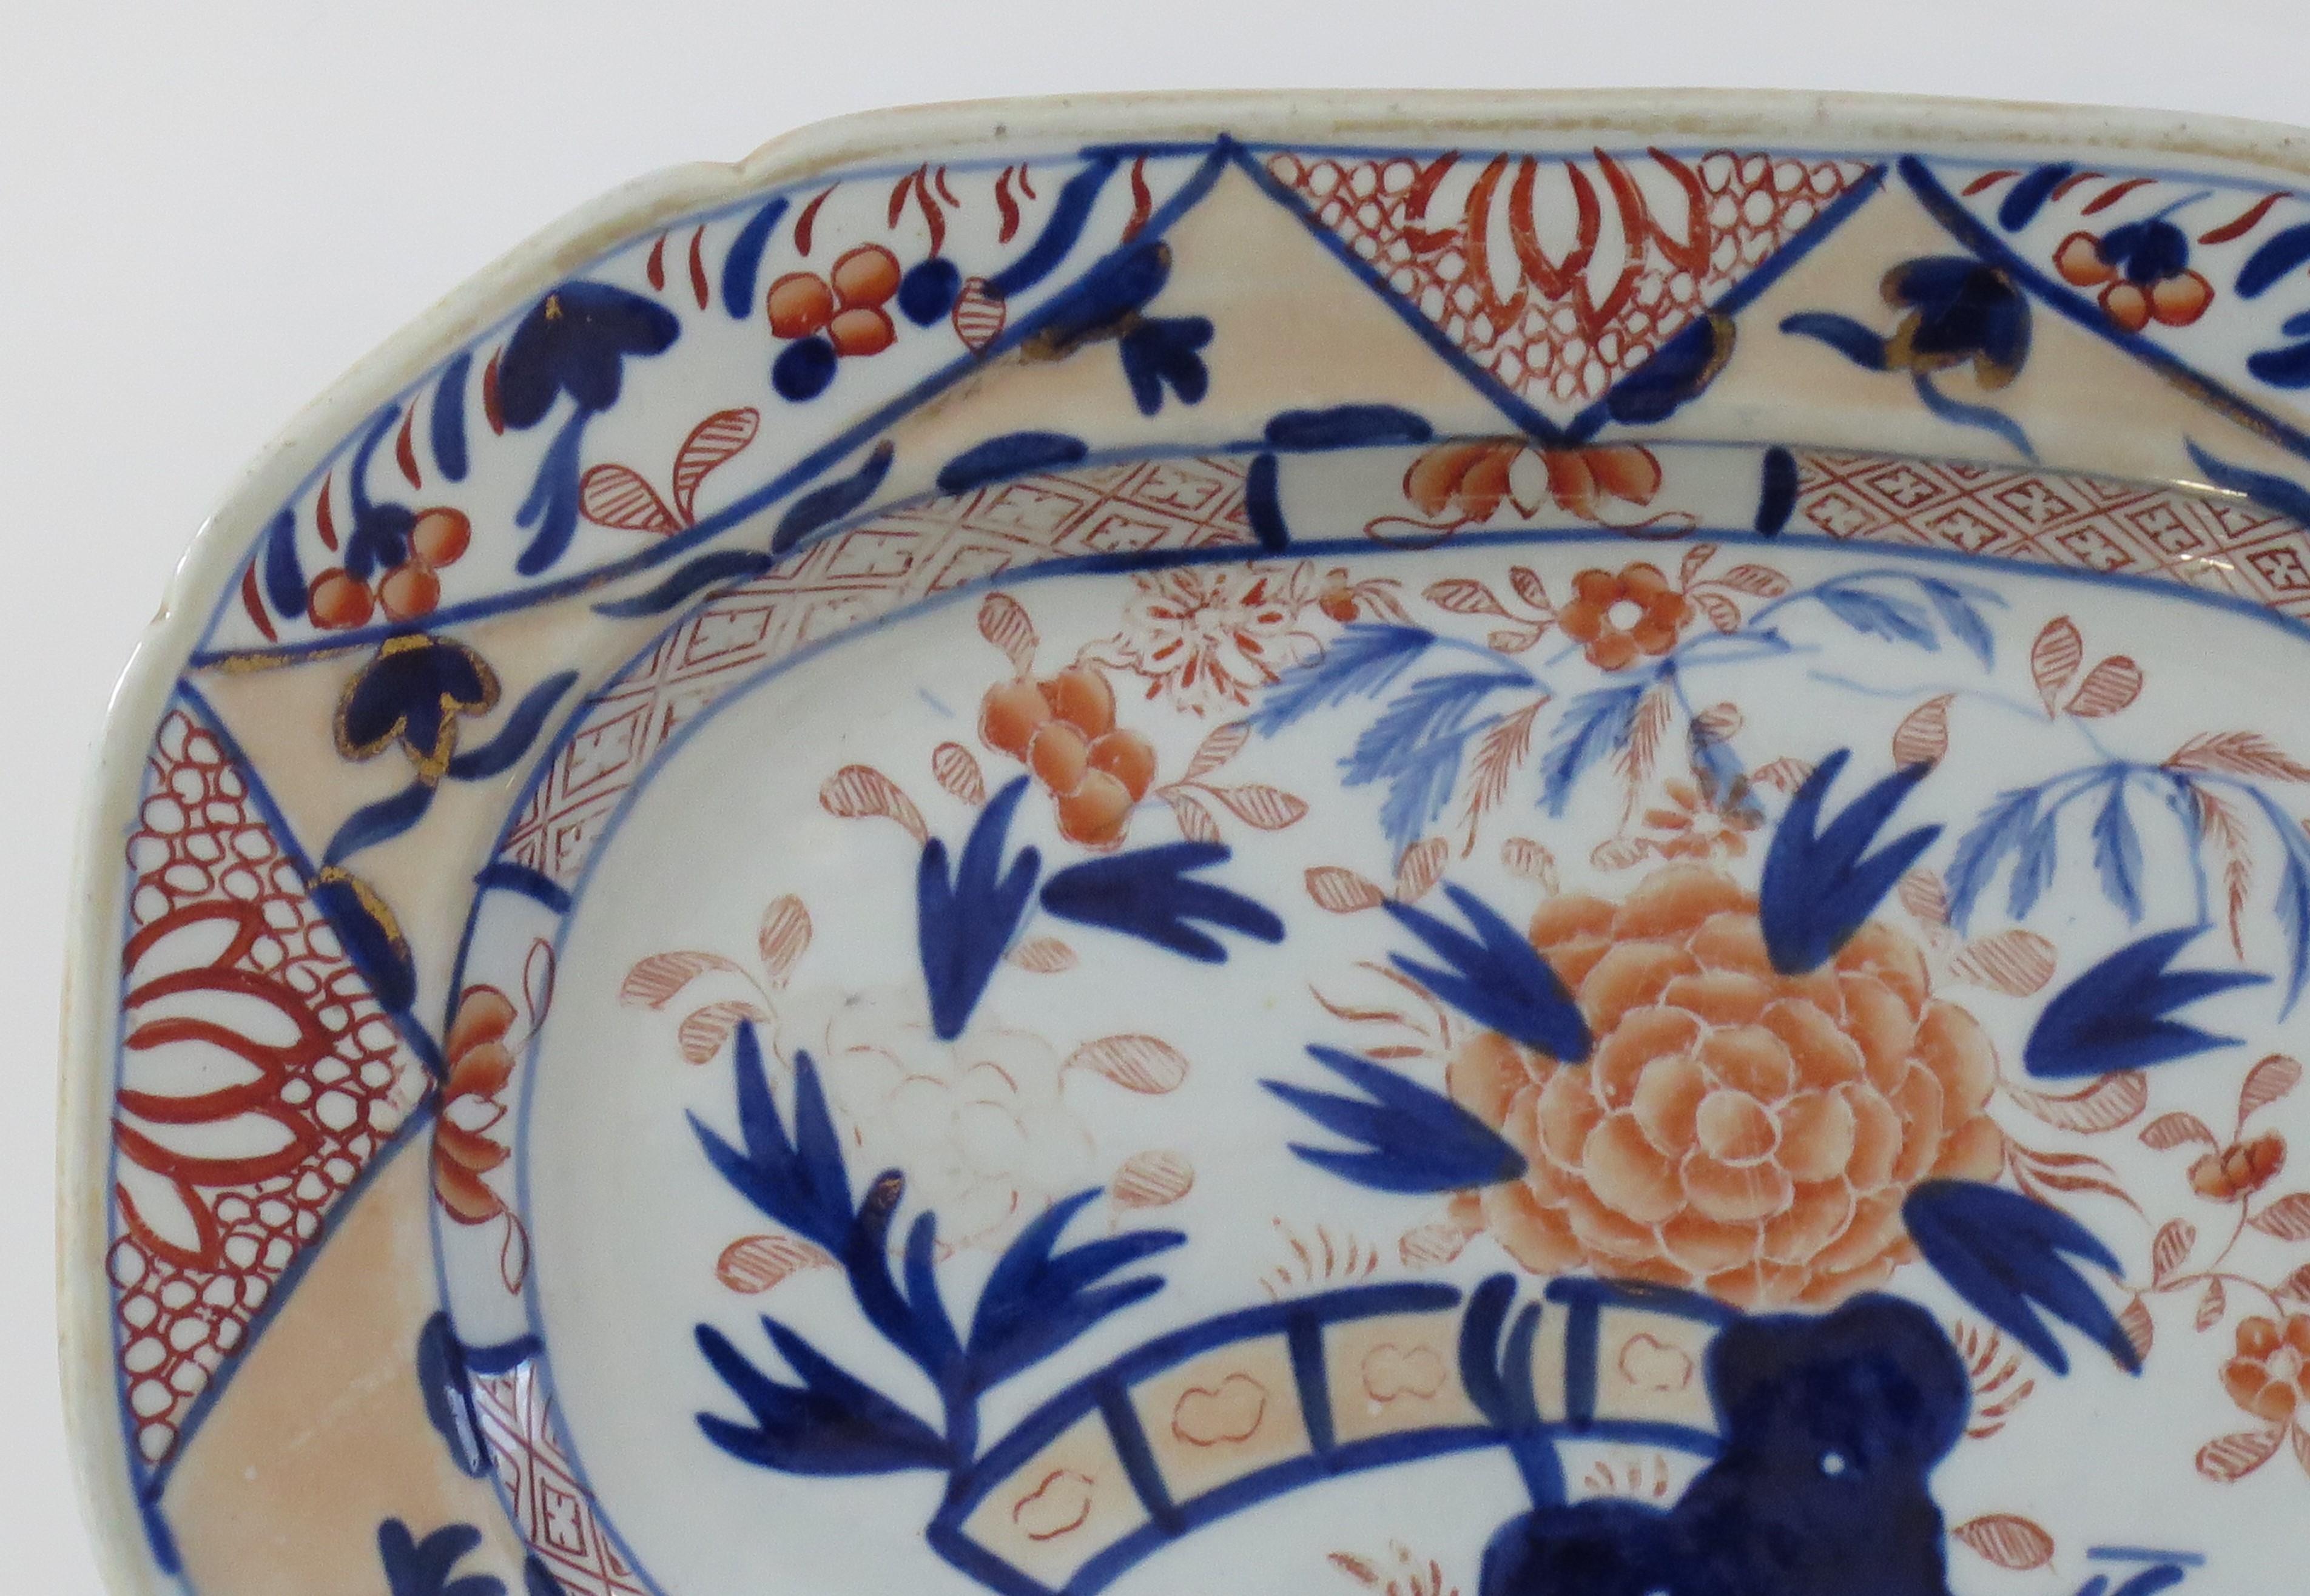 This is a very decorative small rectangular serving platter by Mason's Ironstone, Lane Delph, England in the Oriental Pheasant pattern, dating to the very early period of Mason's ironstone, circa 1820.

The platter or dish is rectangular in shape